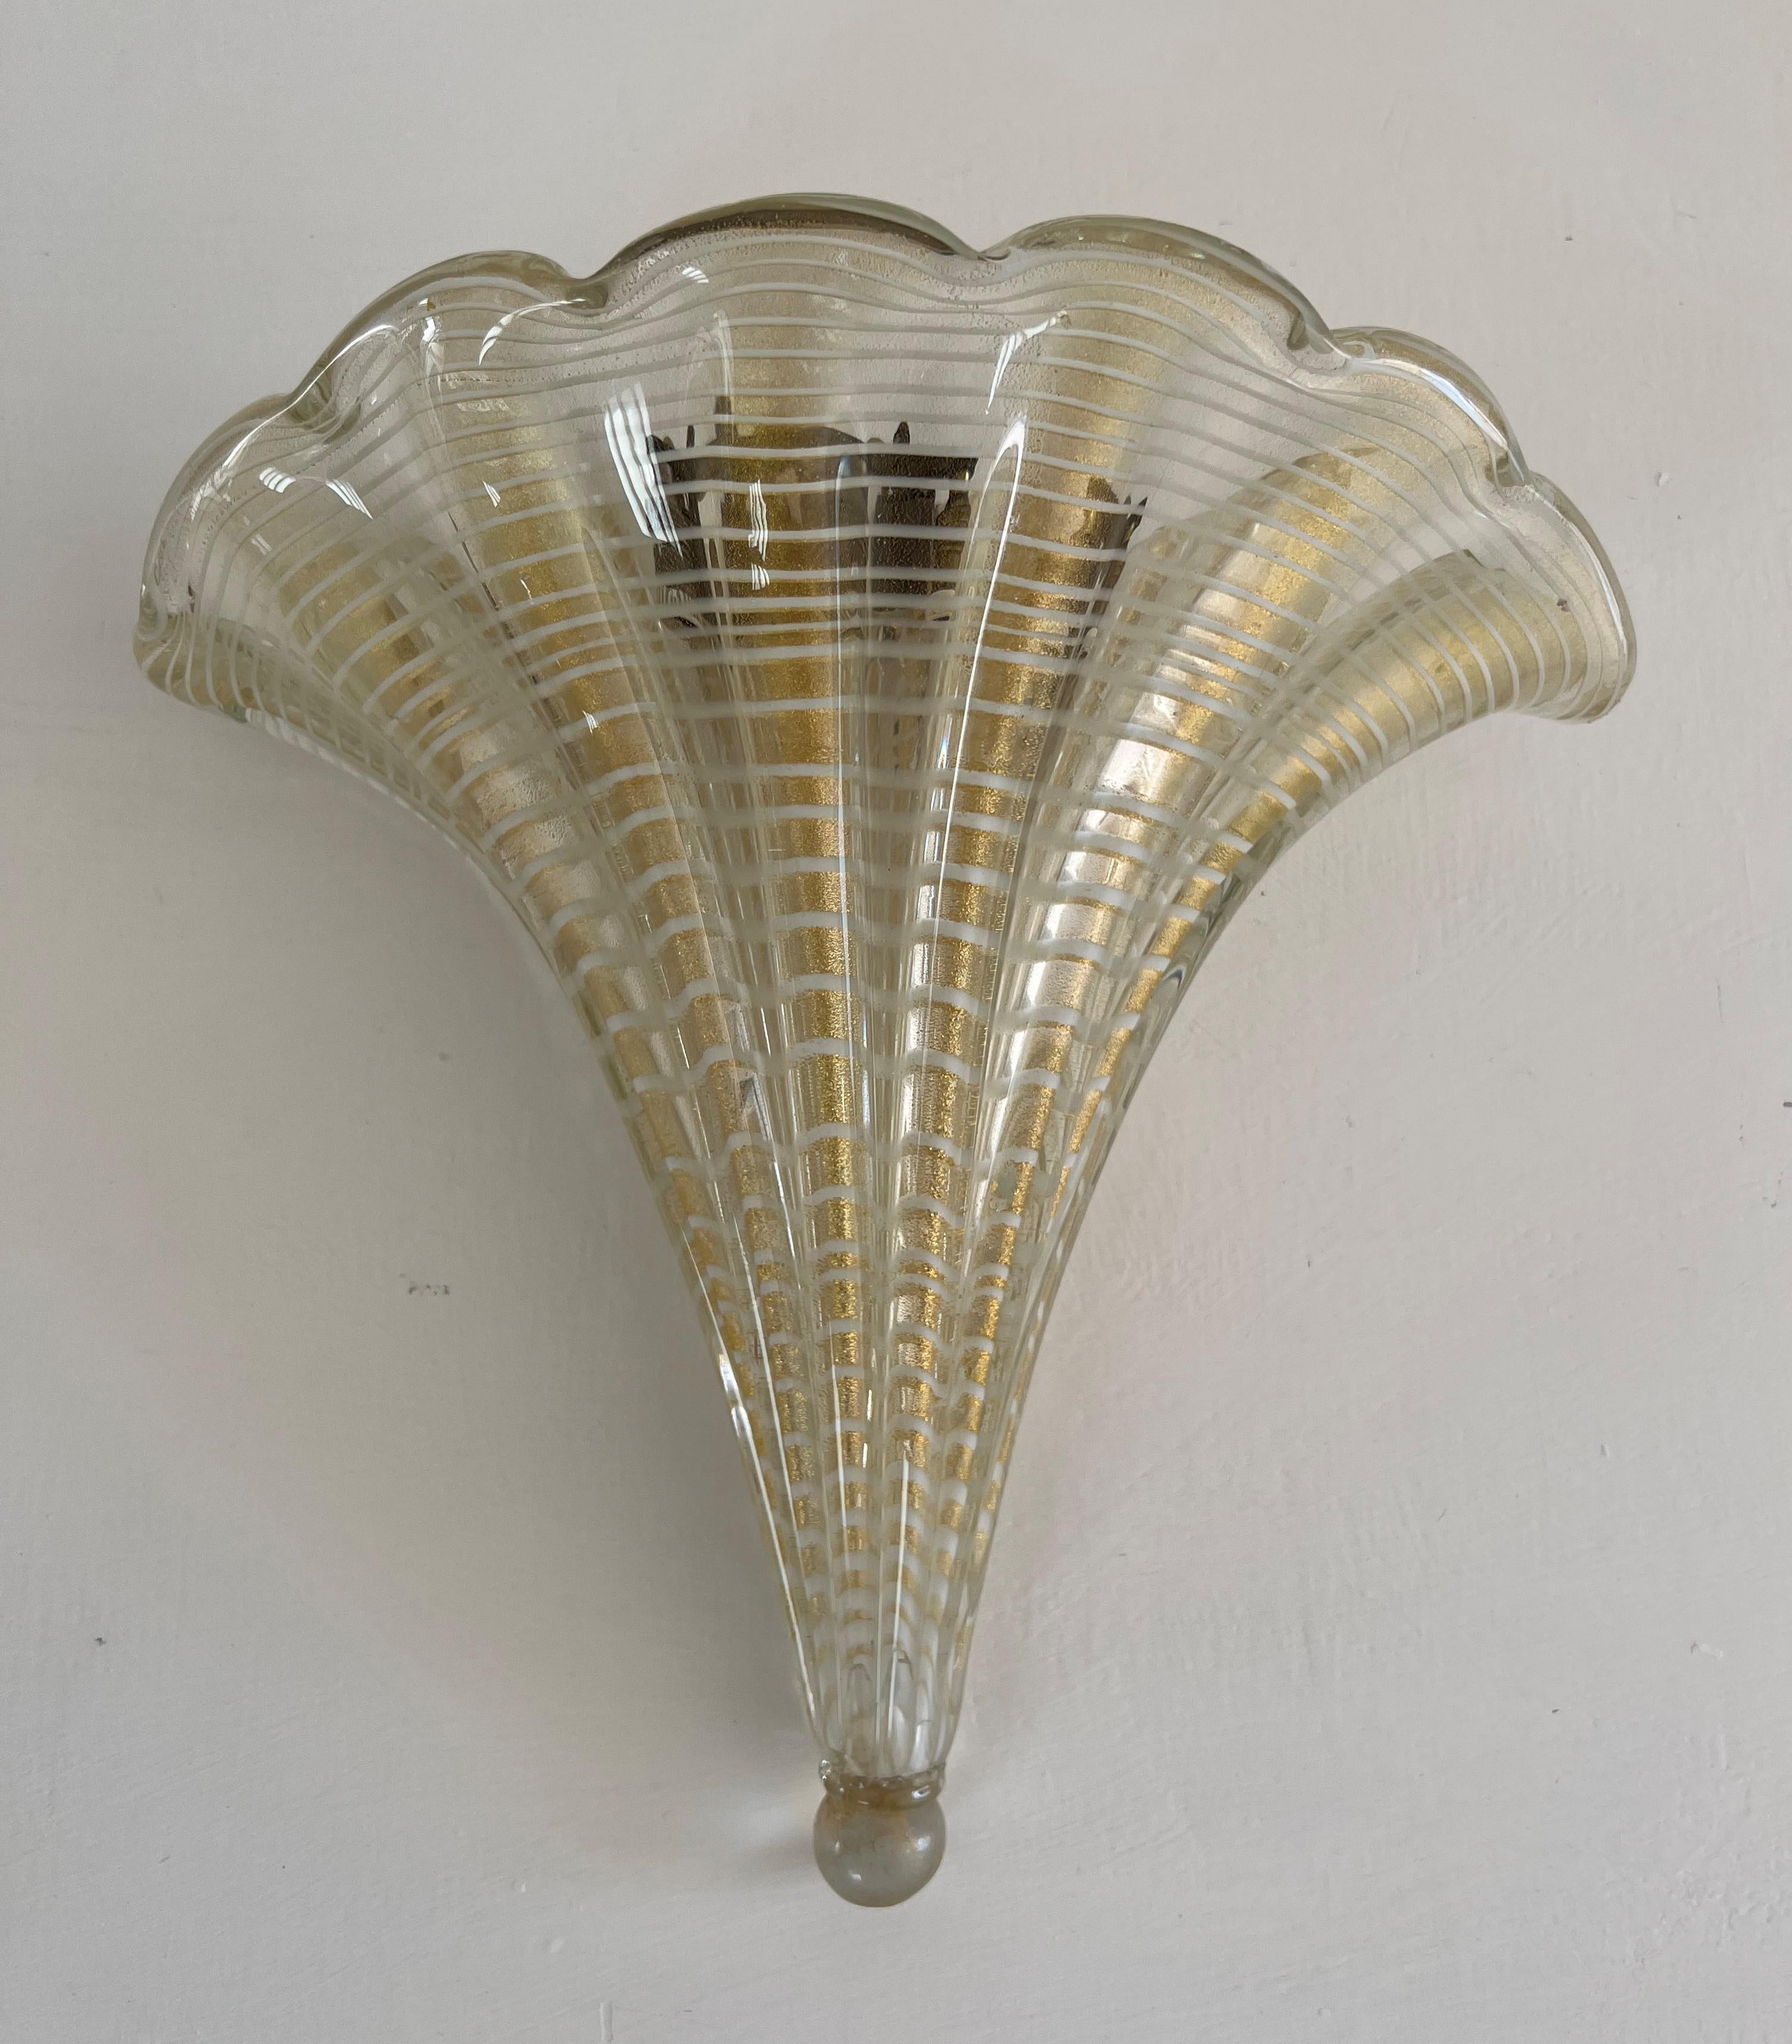 20th Century Mid-Century Modern Sconce Designed by Barovier Toso, Italy, circa 1960 For Sale